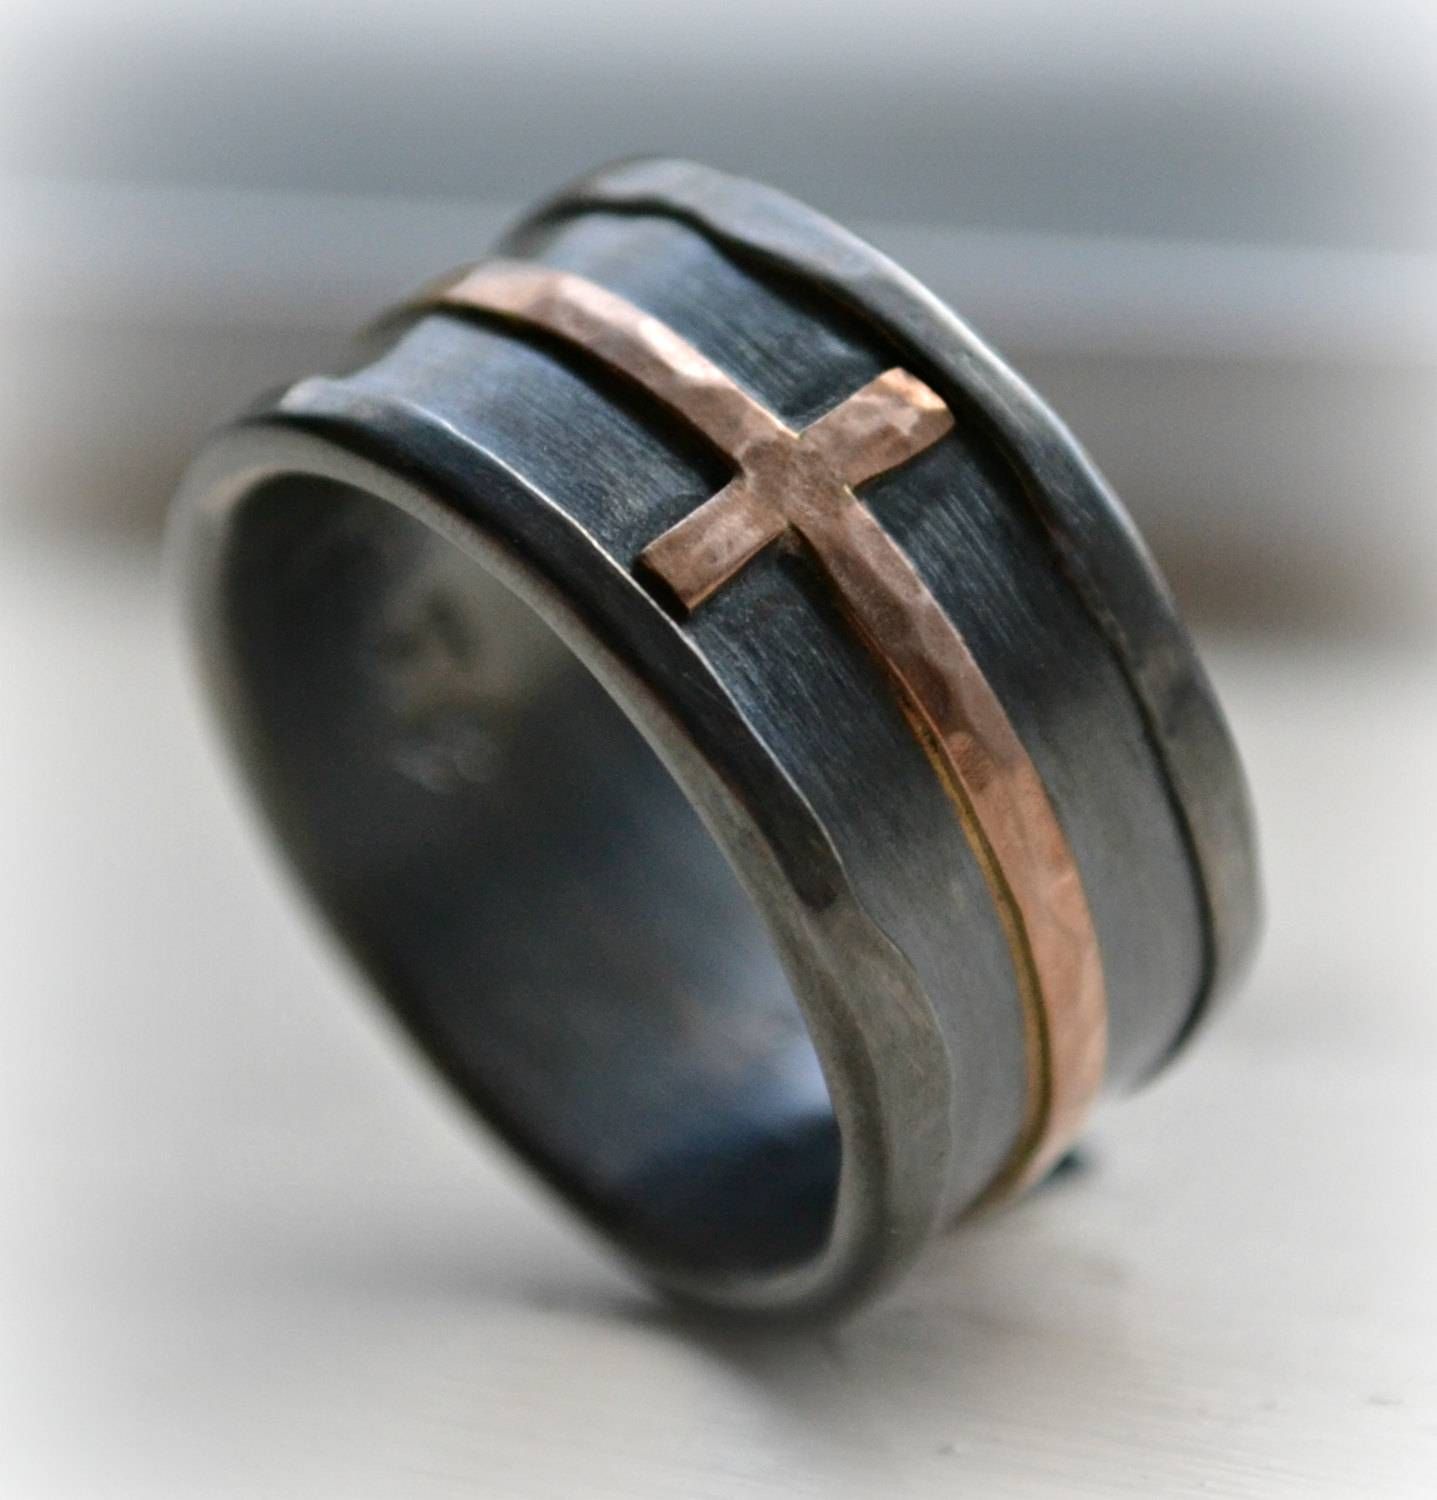 Engagement Rings : Mens Celtic Wedding Bands Irish Wedding Ring Intended For Contemporary Mens Wedding Rings (View 13 of 15)